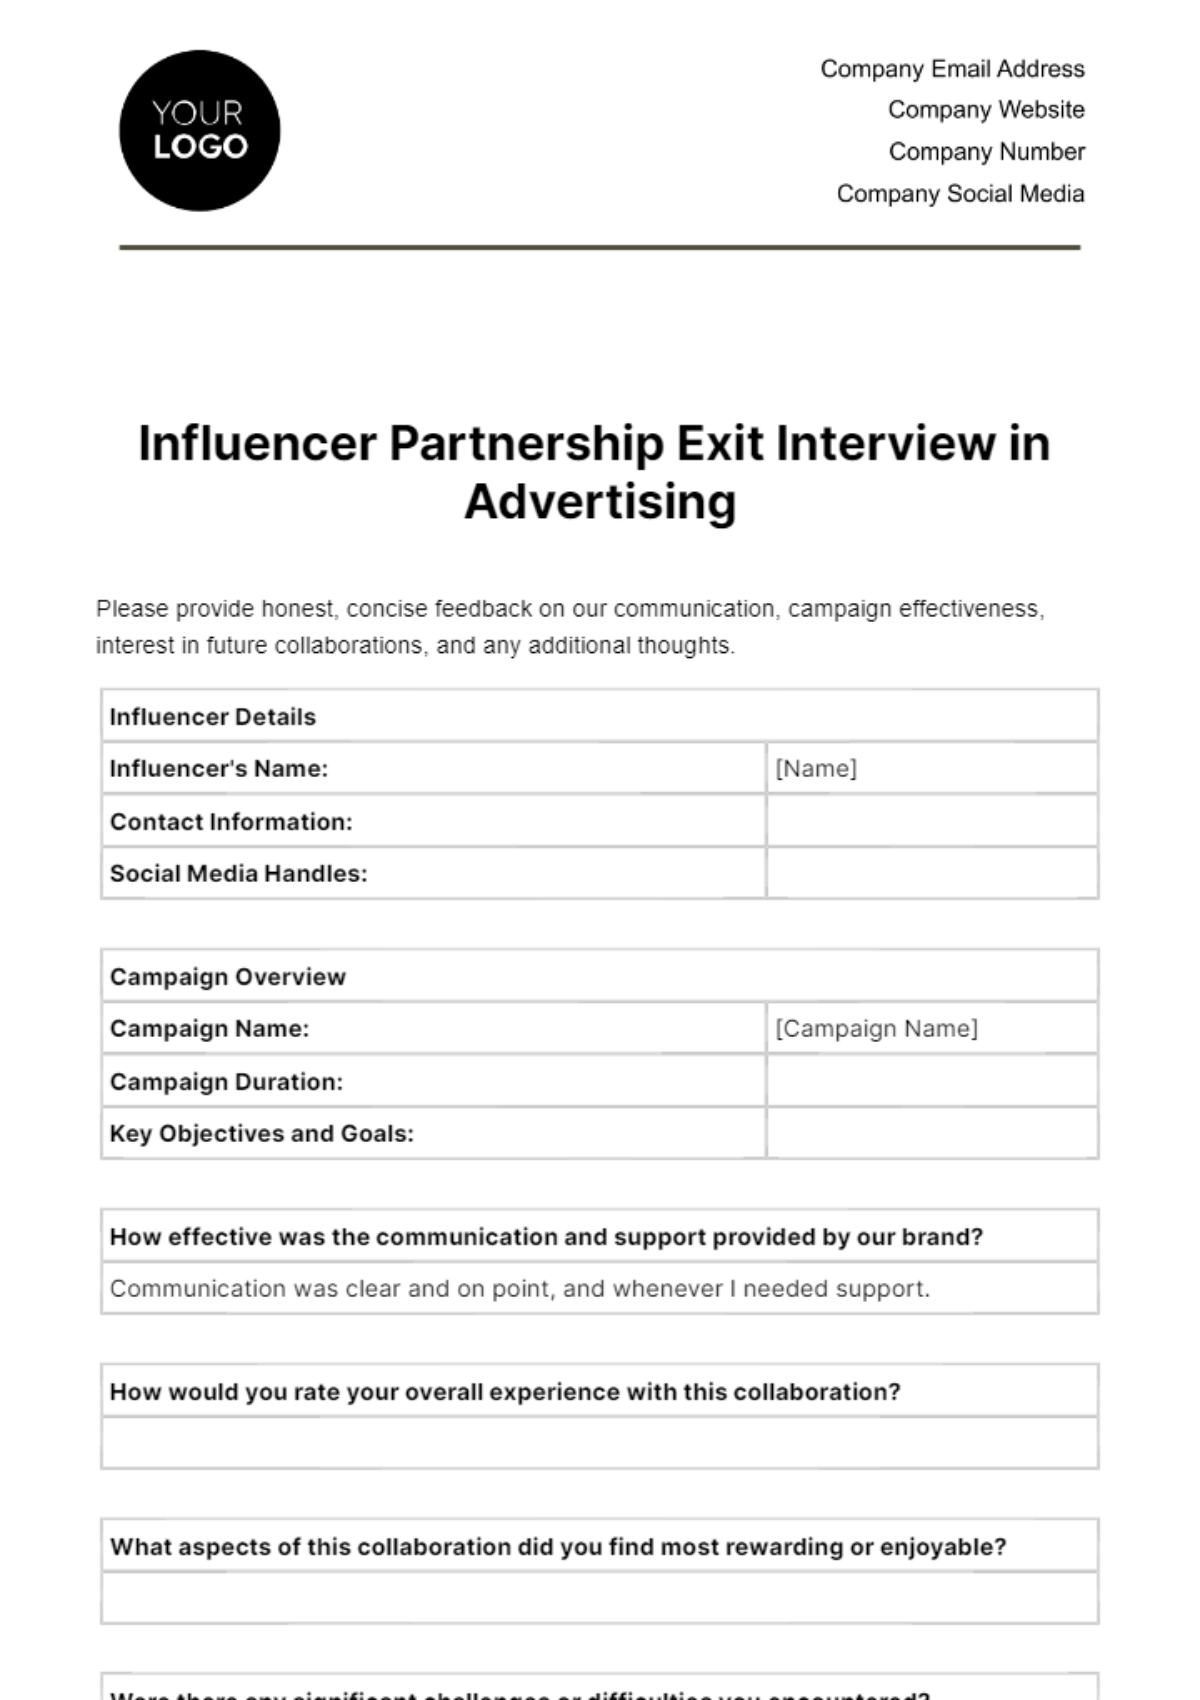 Influencer Partnership Exit Interview in Advertising Template